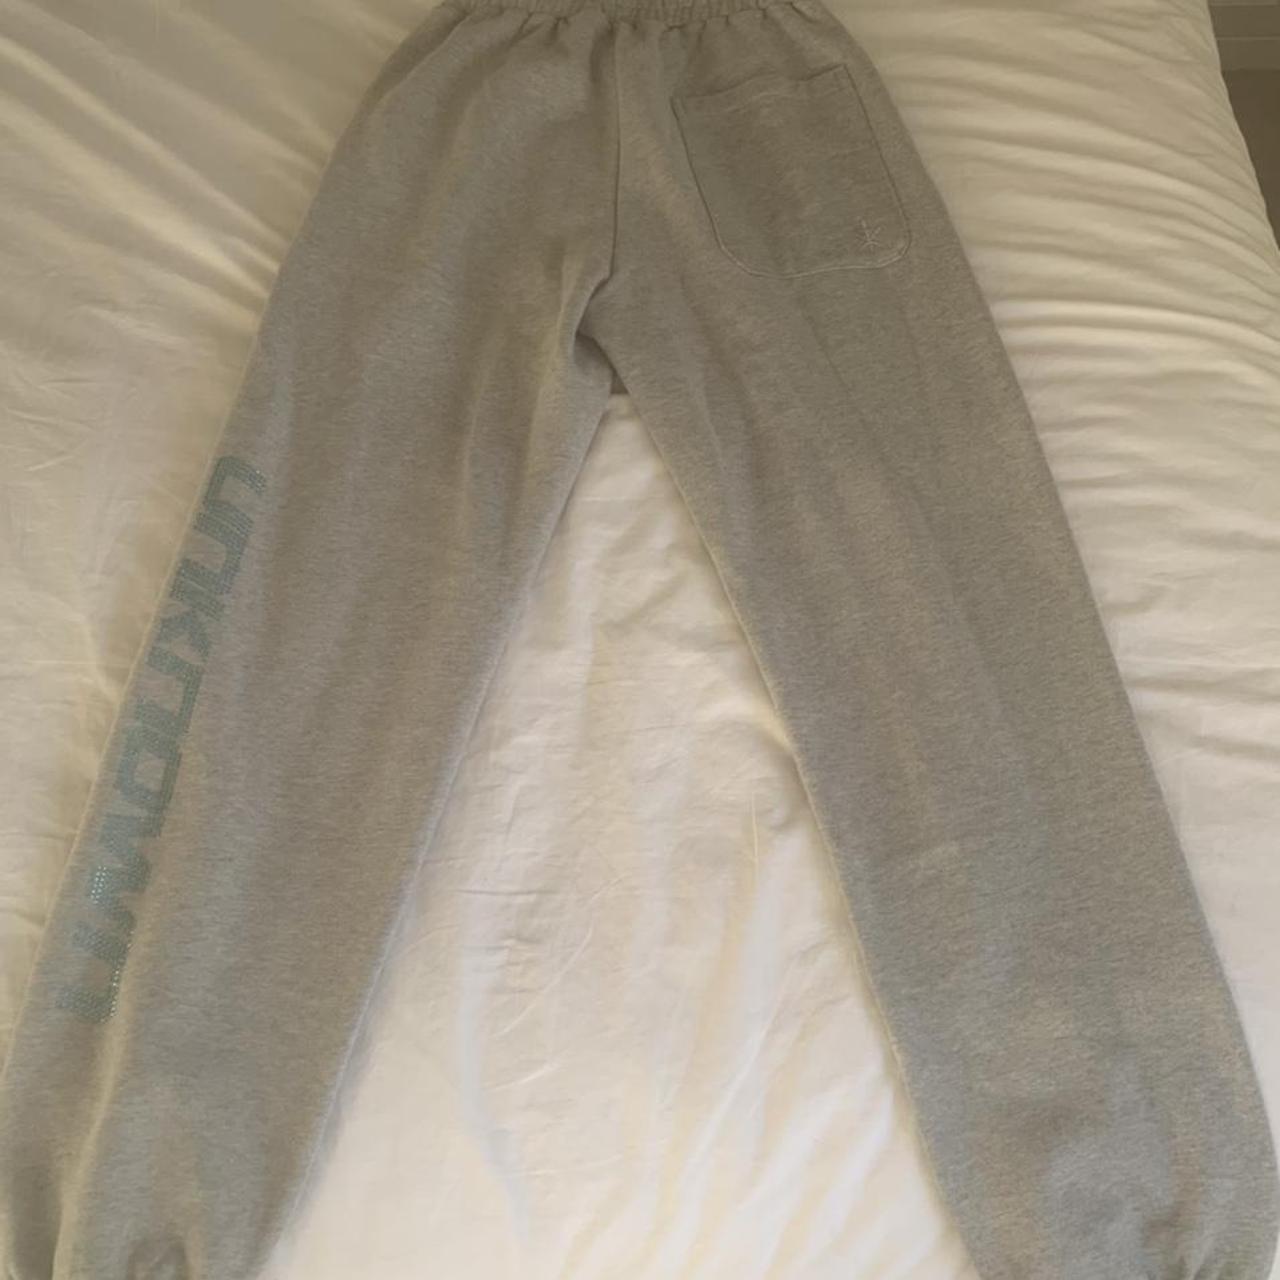 Unknown london grey joggers. Never worn, very good... - Depop